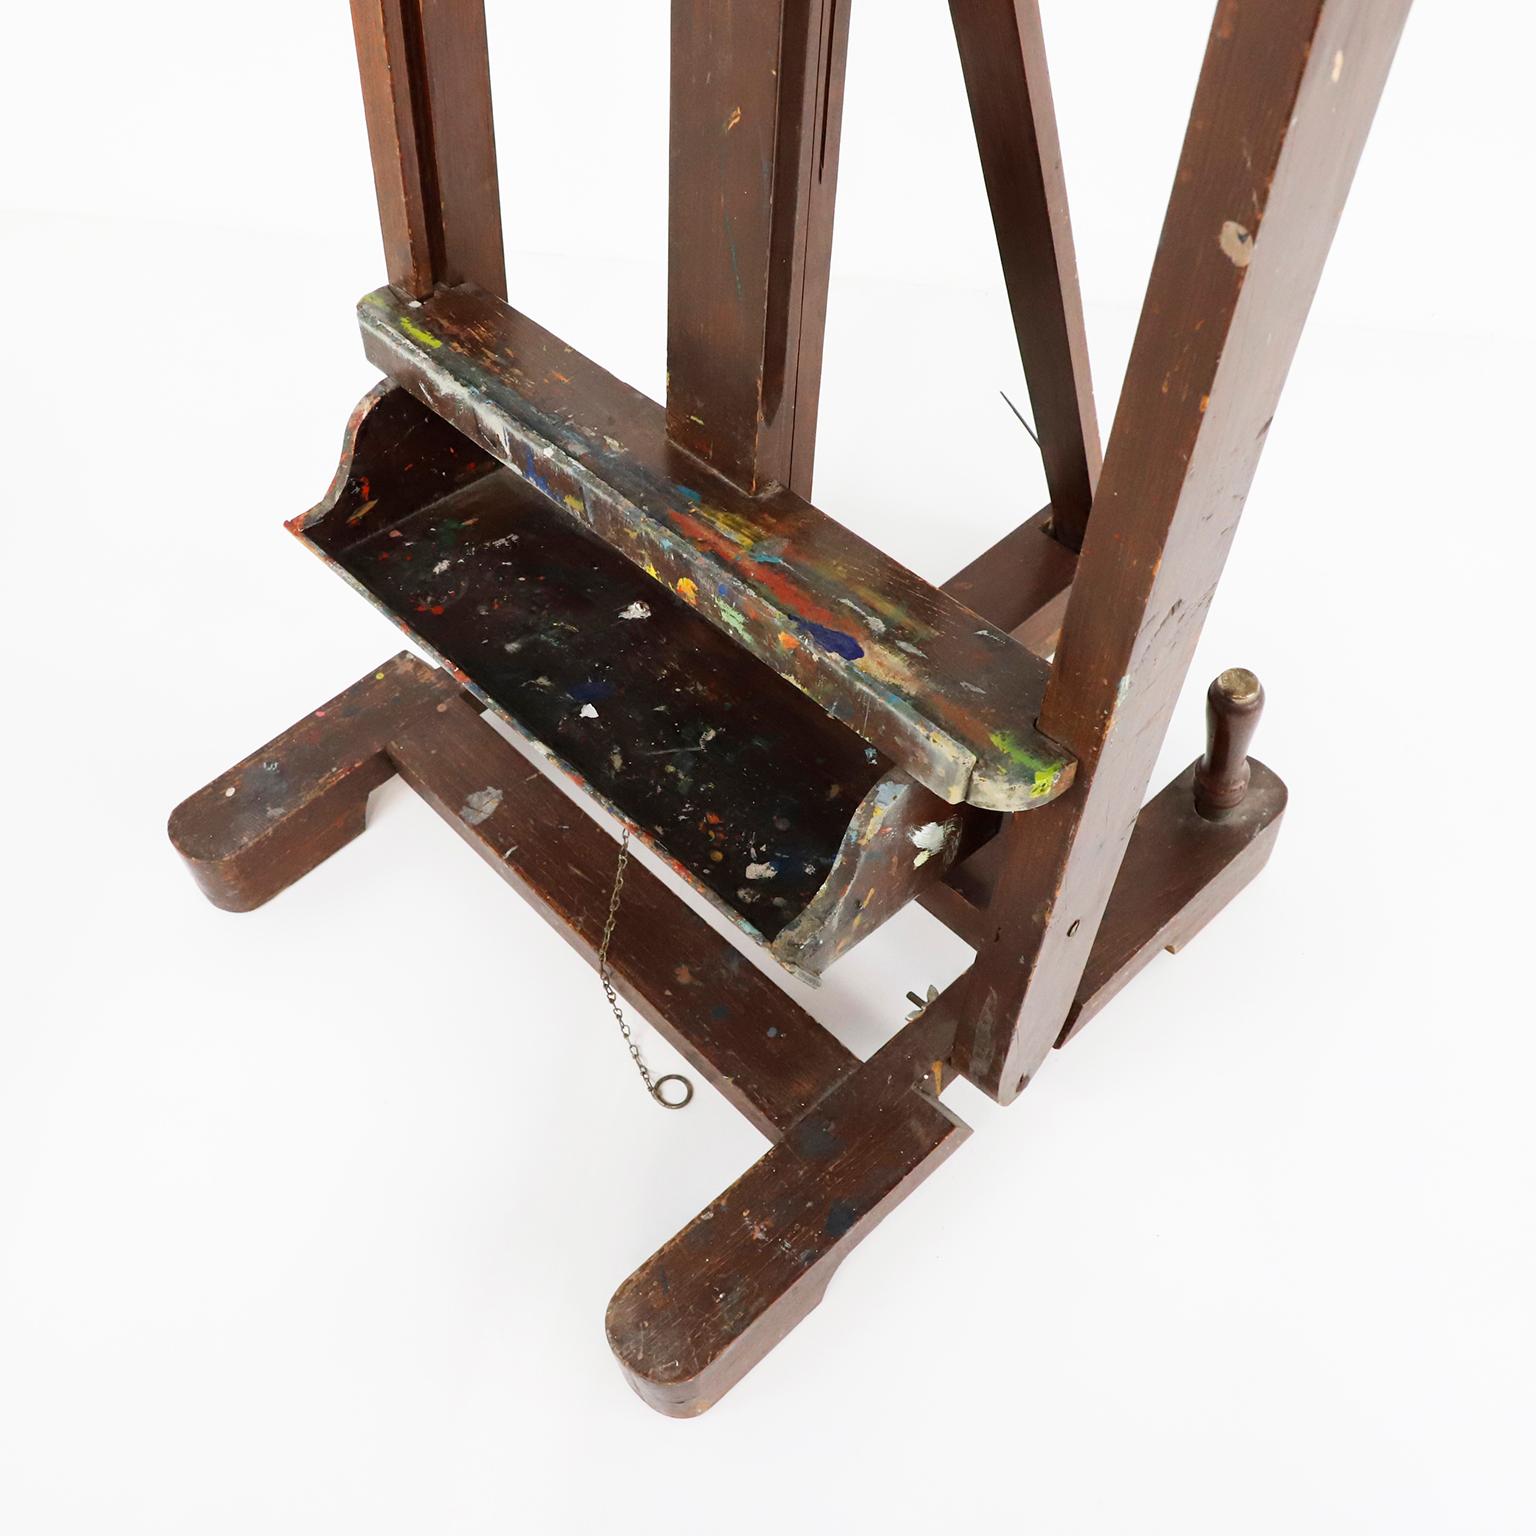 A Mexican wooden adjustable artist easel, circa 1950. This easel has the same design as those currently in the study of Diego Rivera and Frida Kahlo, has a nice old patina, with remnants of artistic creations of past, standing tall, ready for the